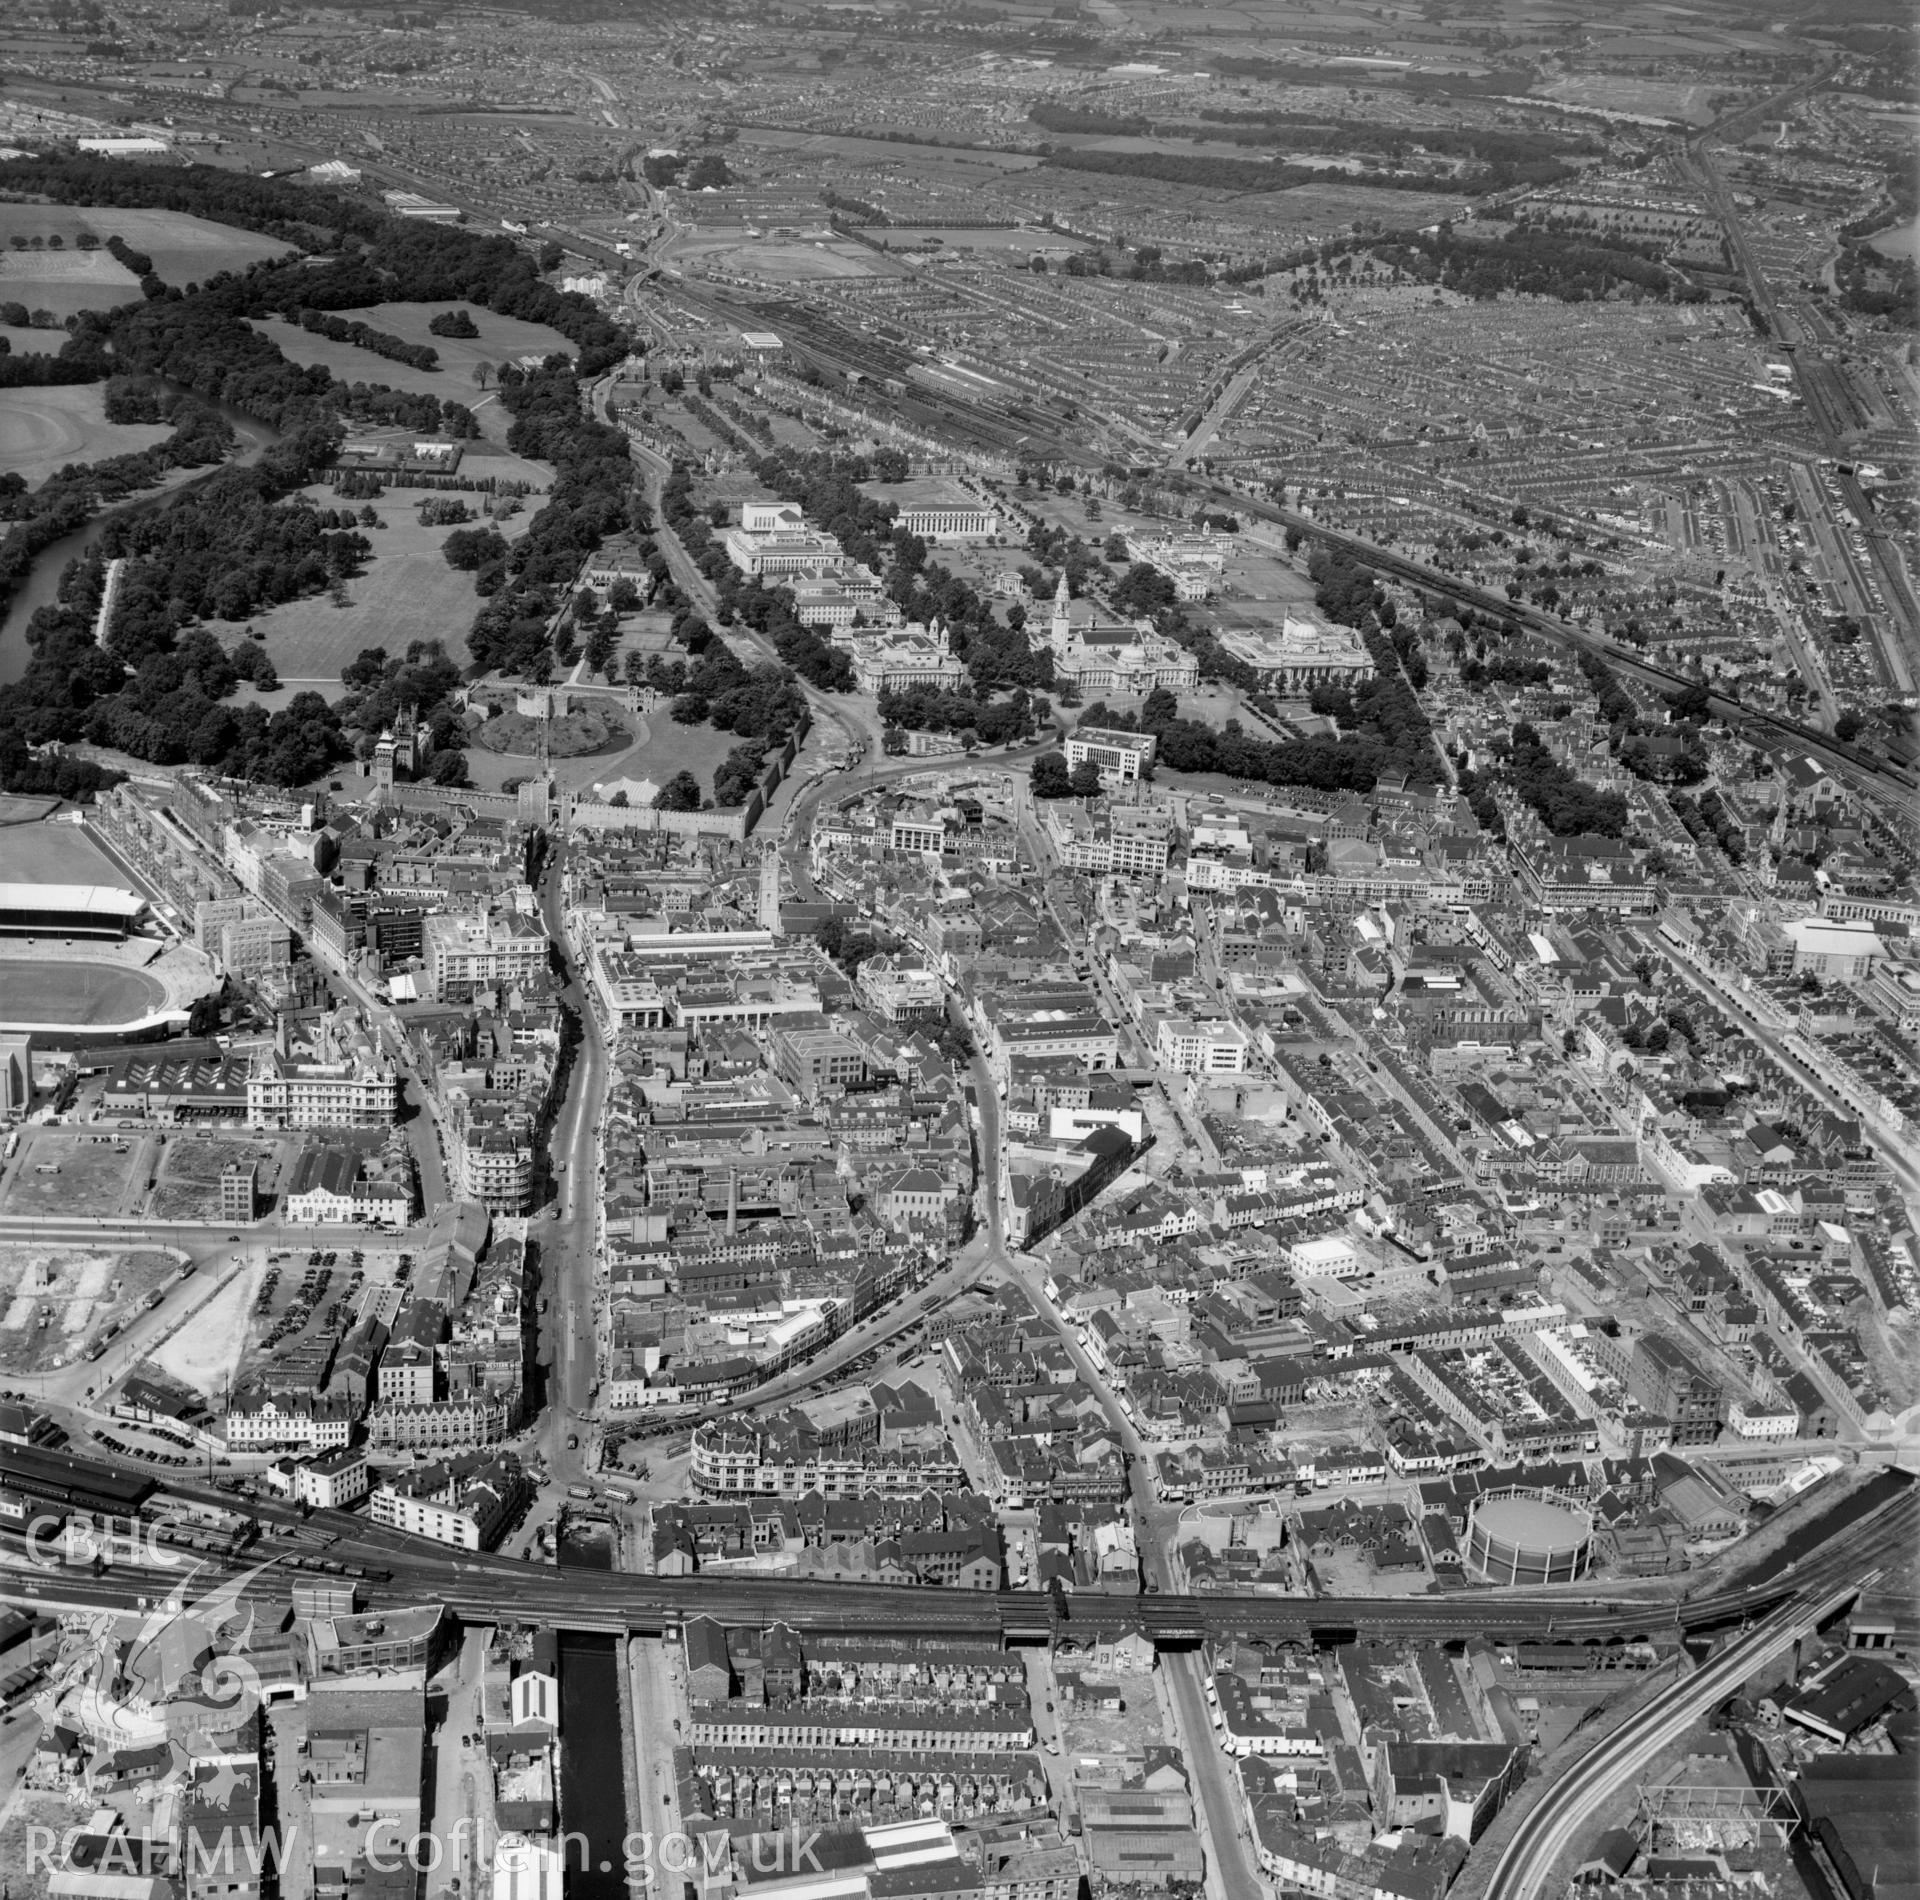 General view of central Cardiff